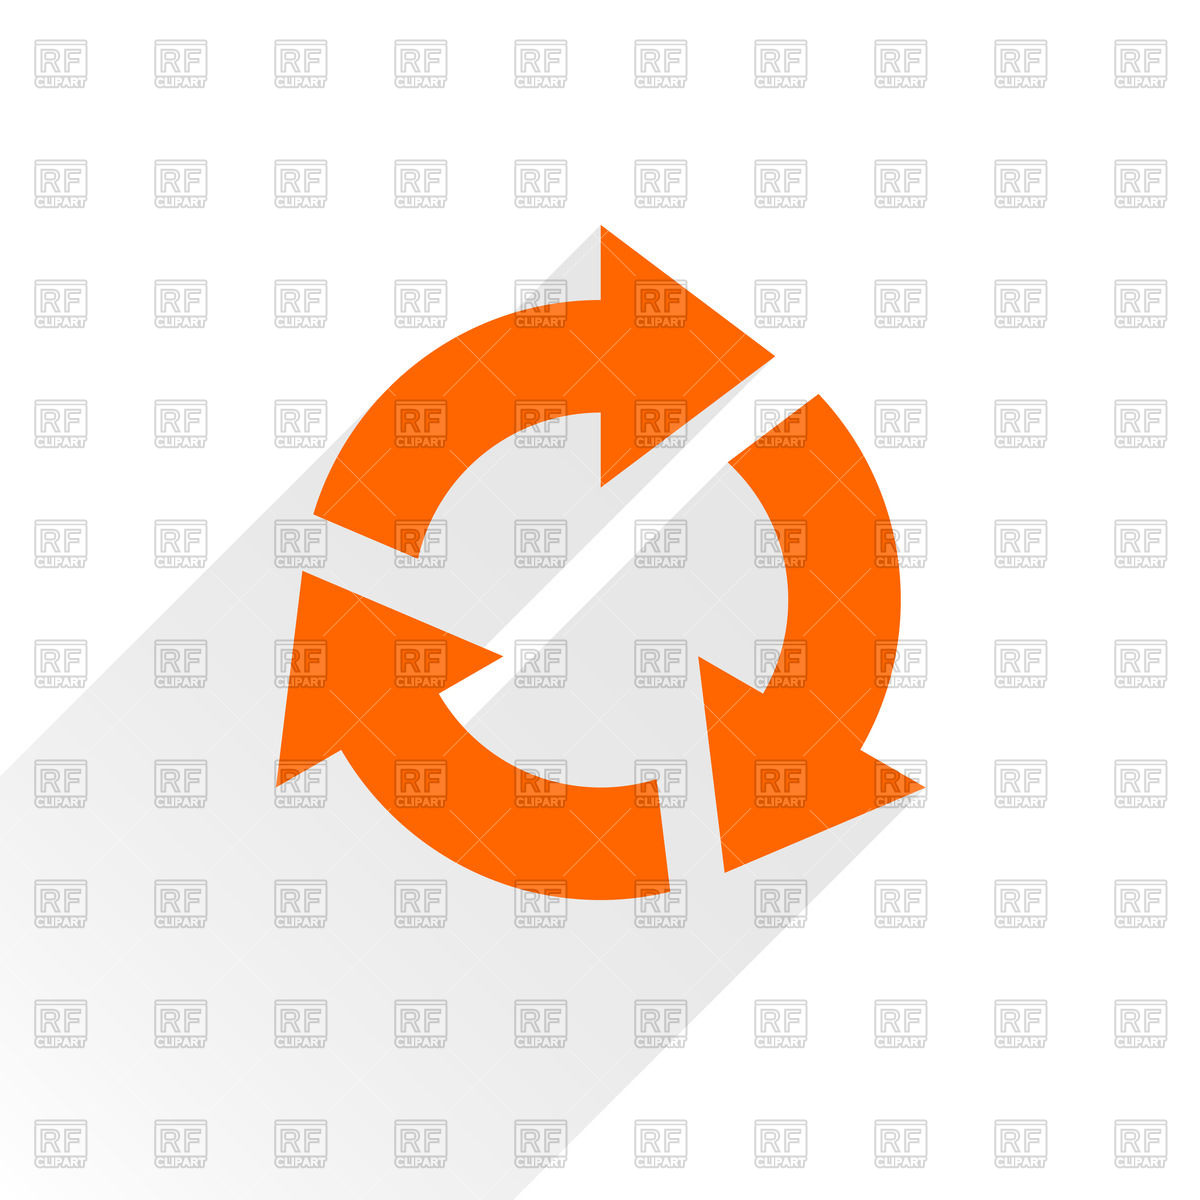 Three Sections Orange Round Arrow 50027 Download Royalty Free Vector